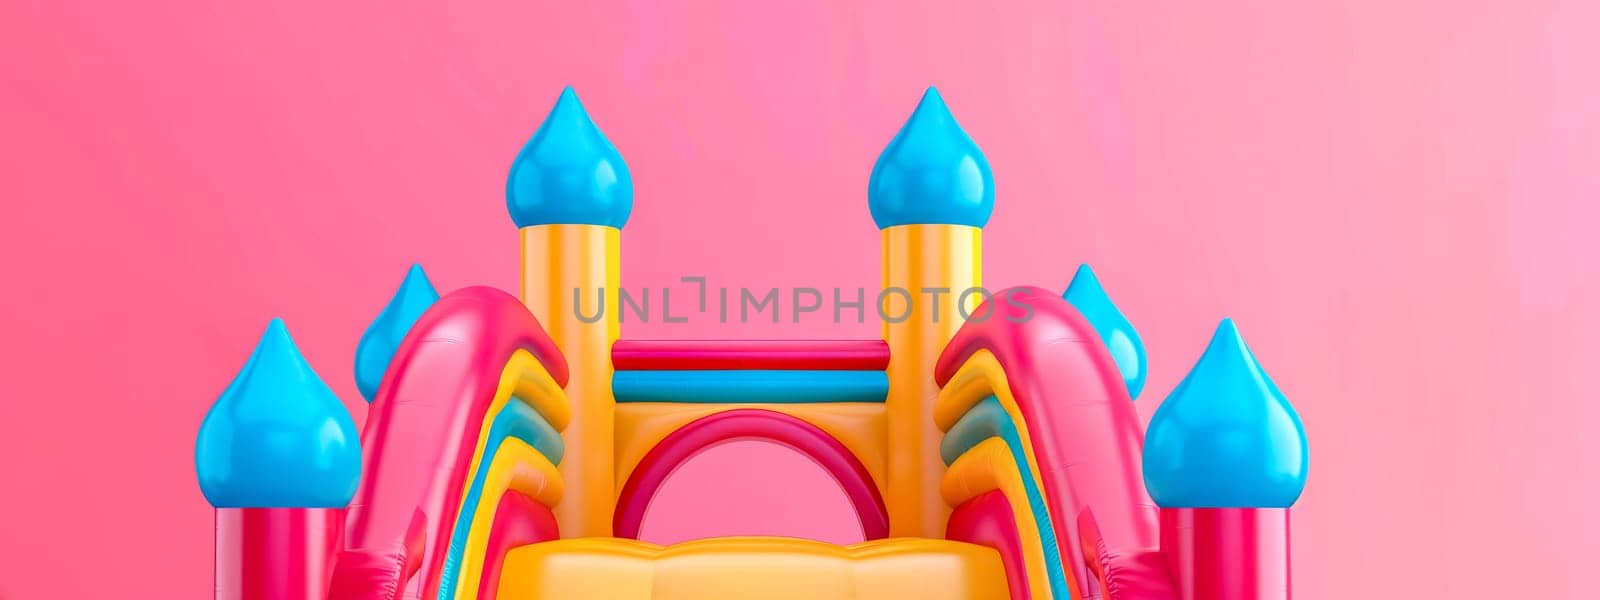 Colorful bouncy castle on pink background by Edophoto